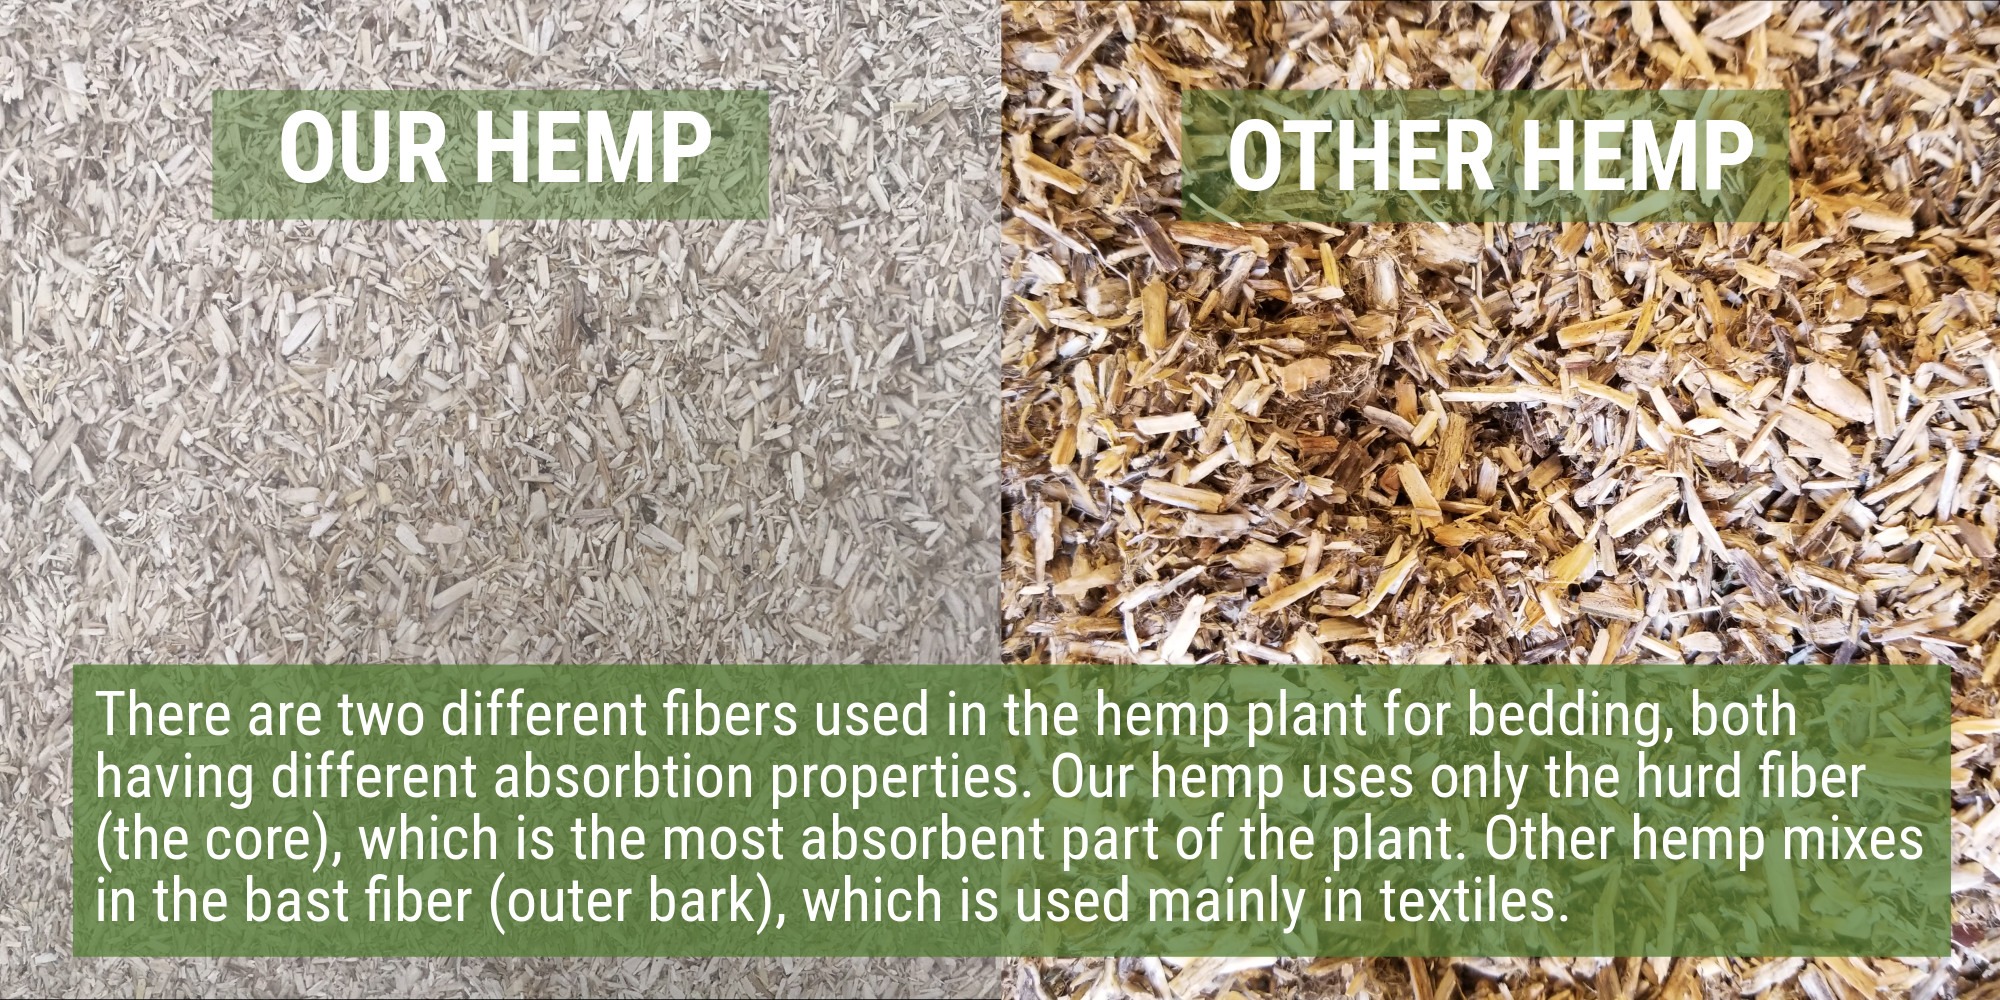 side by side comparison of our hemp vs. other hemp